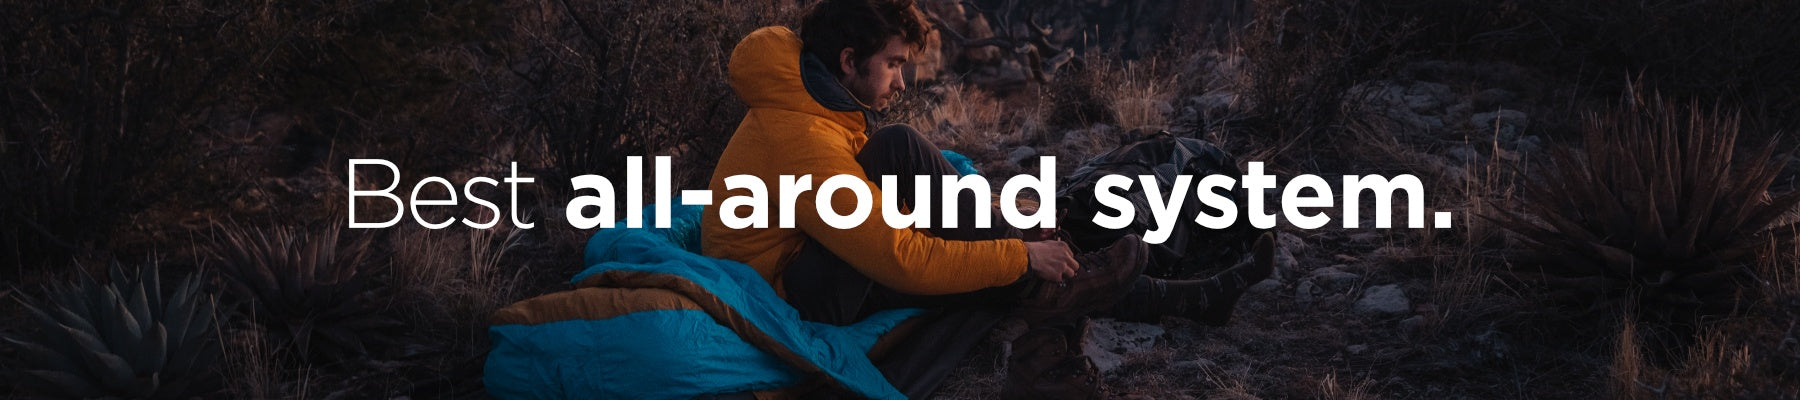 Shop complete sleeping bag bundles. The Zenbivy Bed + Light Mattress is our most popular, best all-around sleeping system for backpacking and car camping alike.